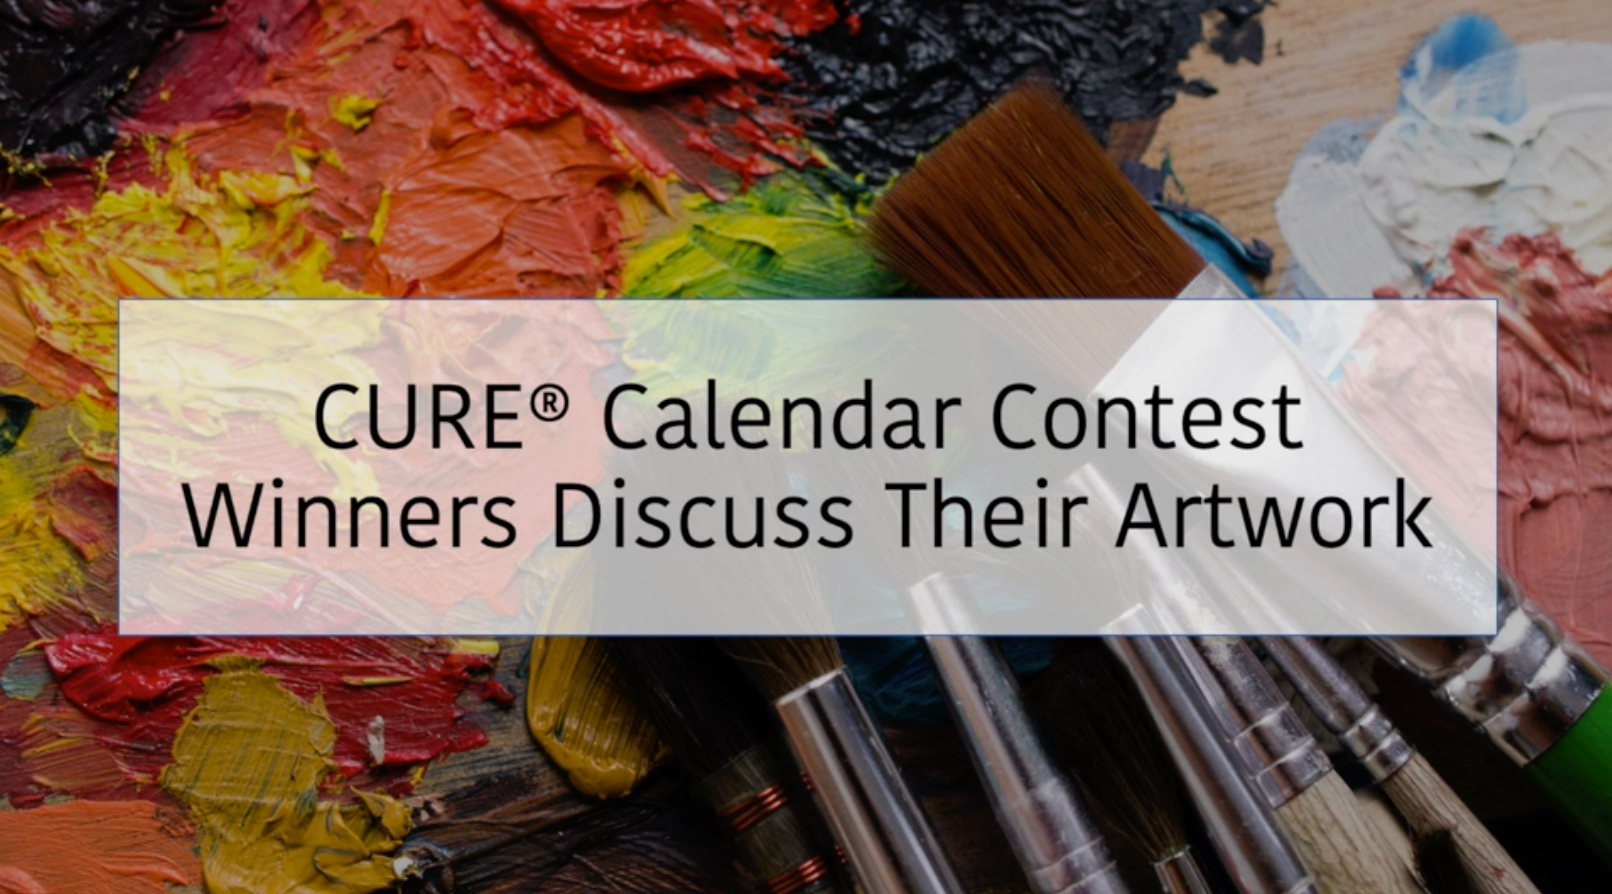 How Artwork Helped These CURE® Calendar Contest Winners Cope With Cancer